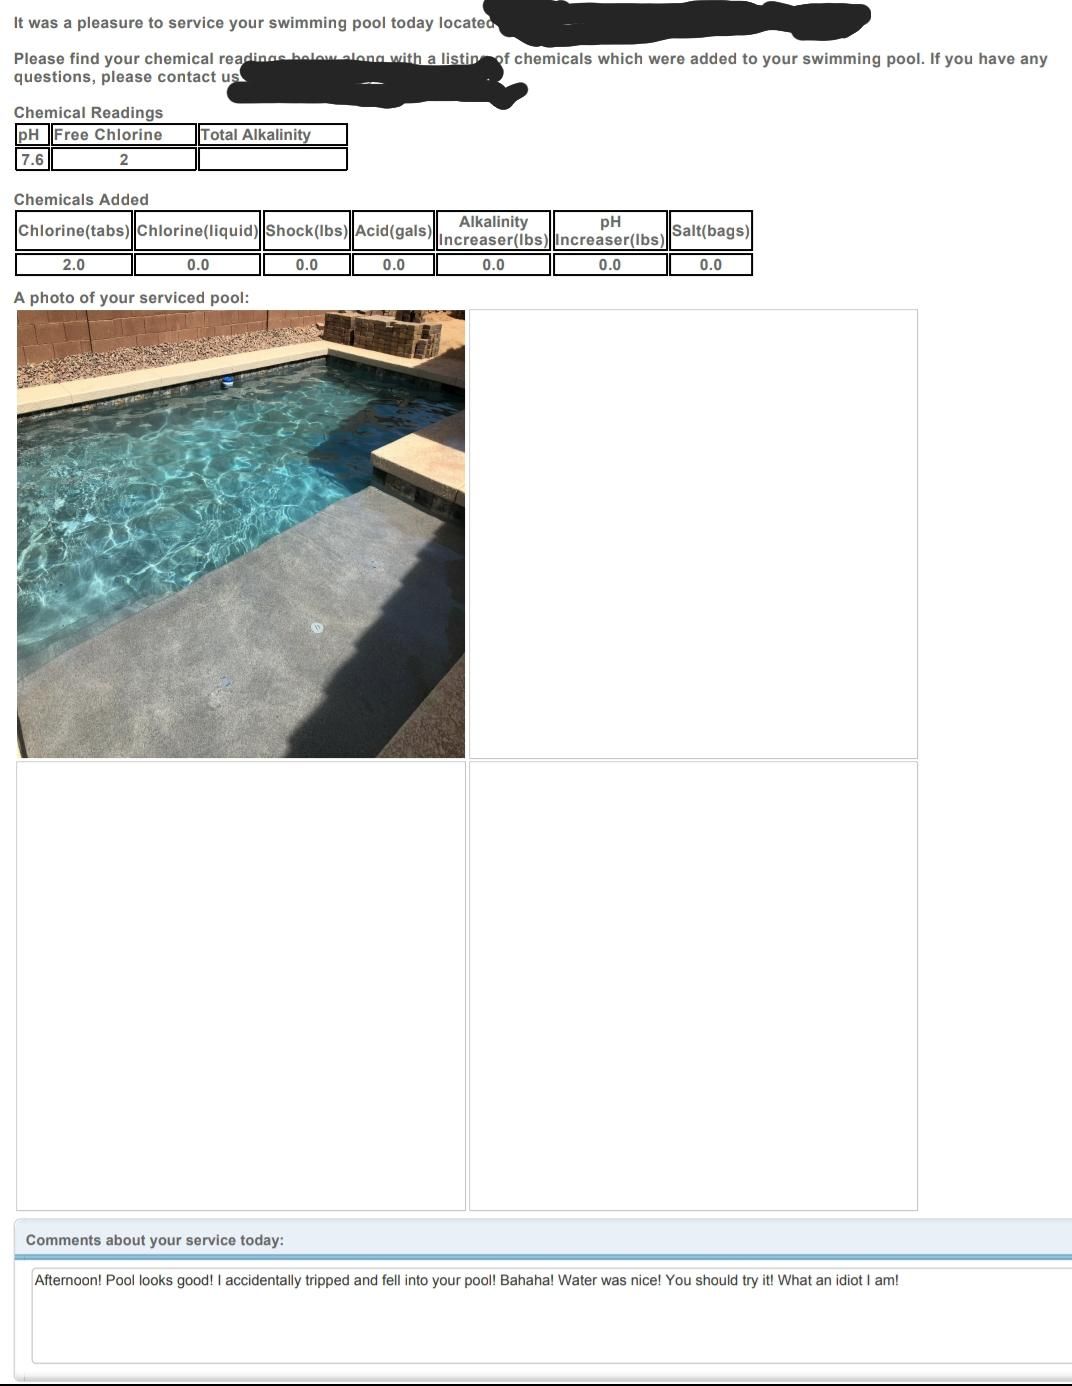 My pool guy sent my weekly report with the side note that he fell into the pool! I wish i had it on video.